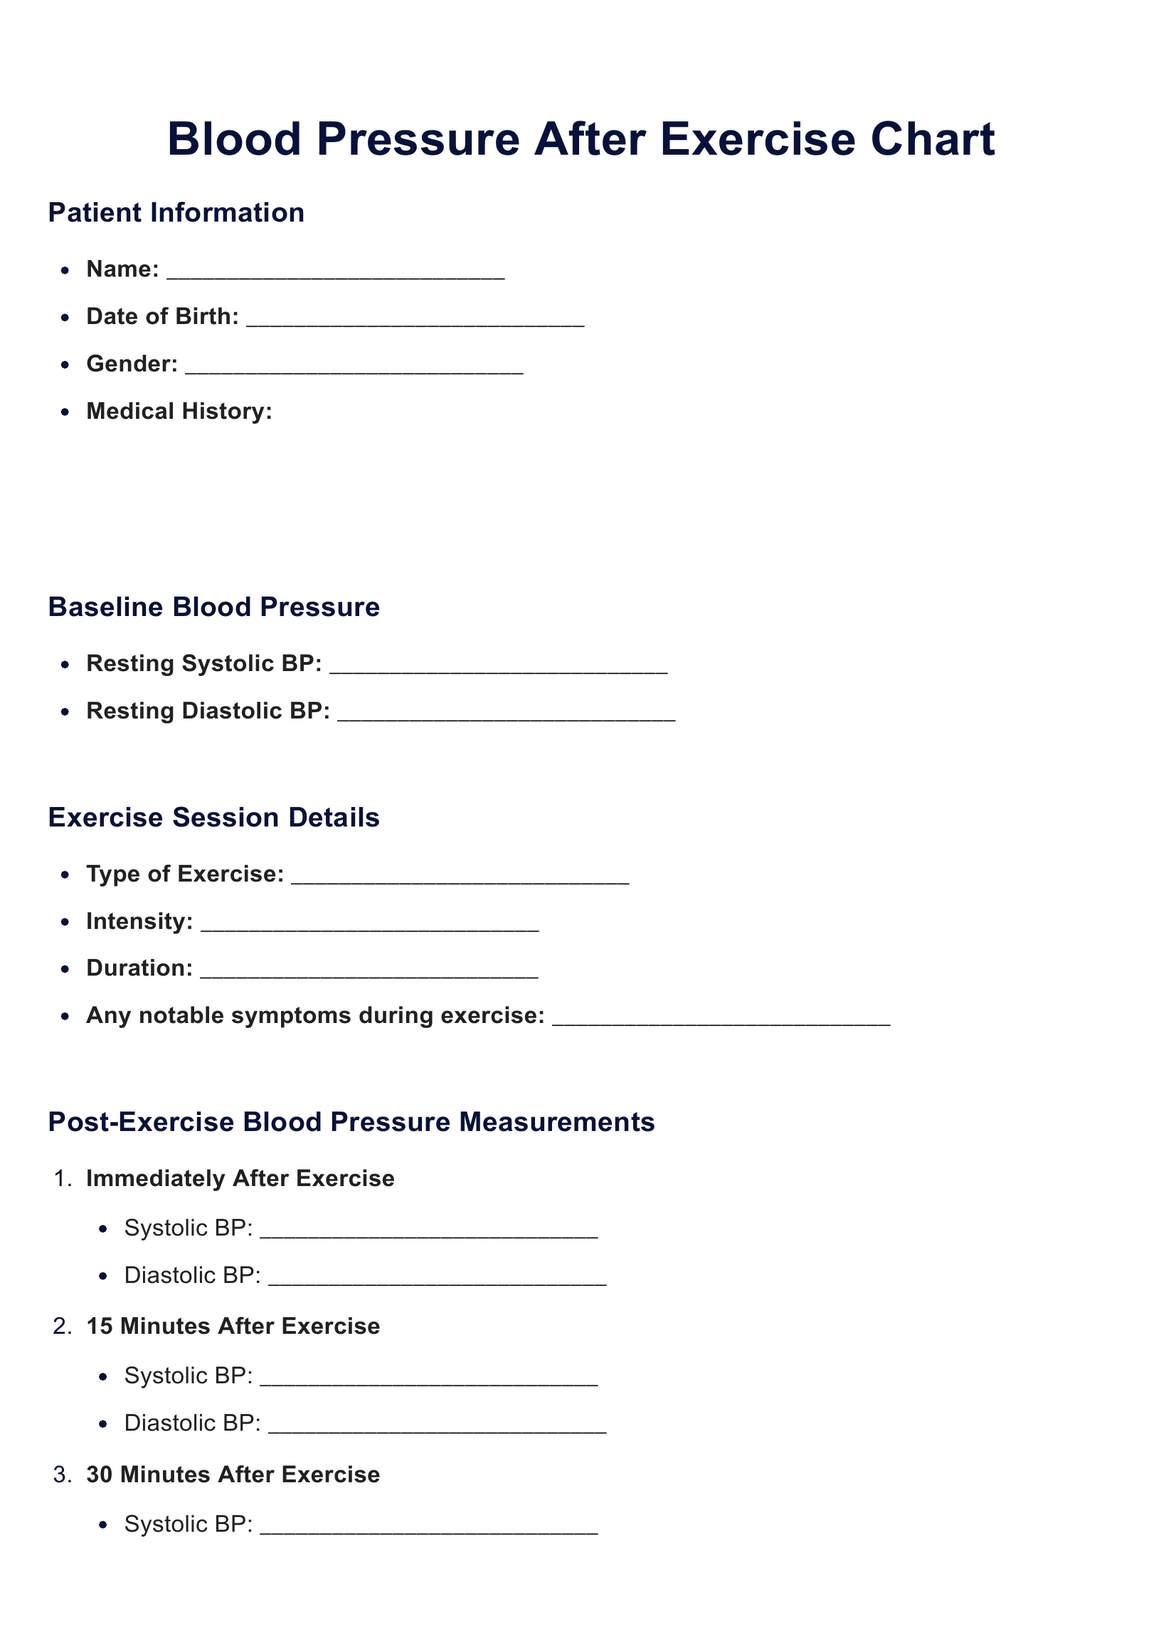 Blood Pressure After Exercise Chart PDF Example